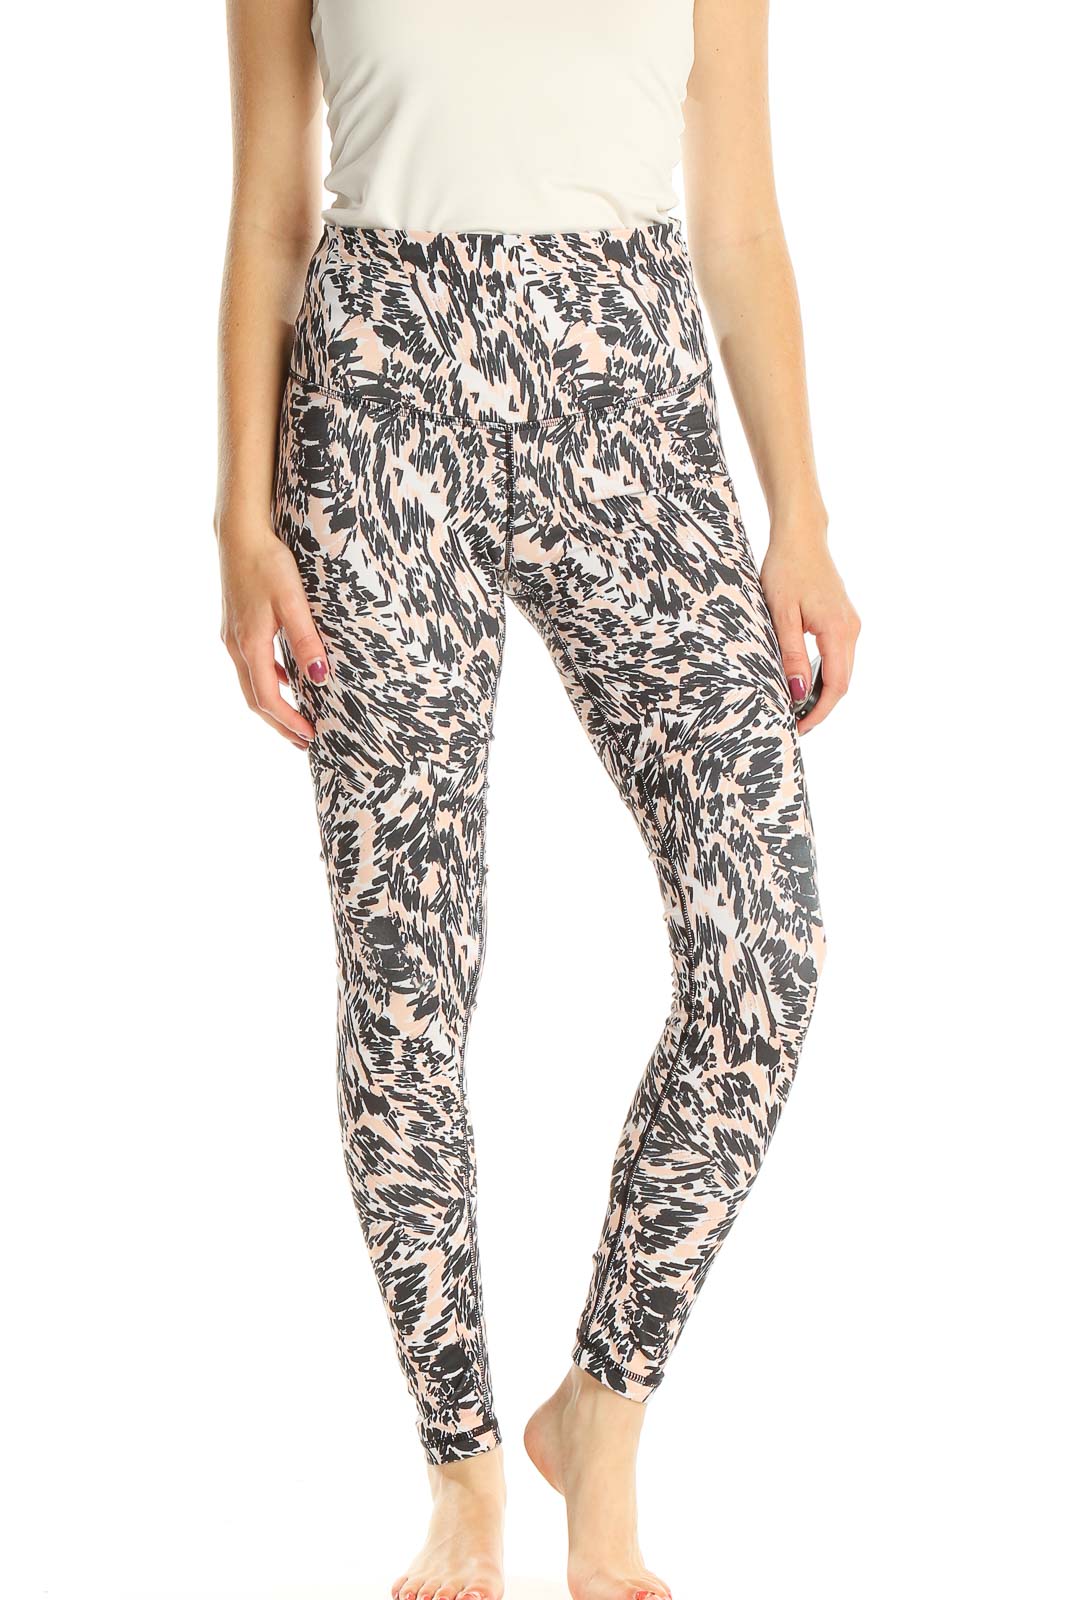 DYI - Multicolor Printed Activewear Leggings Polyester